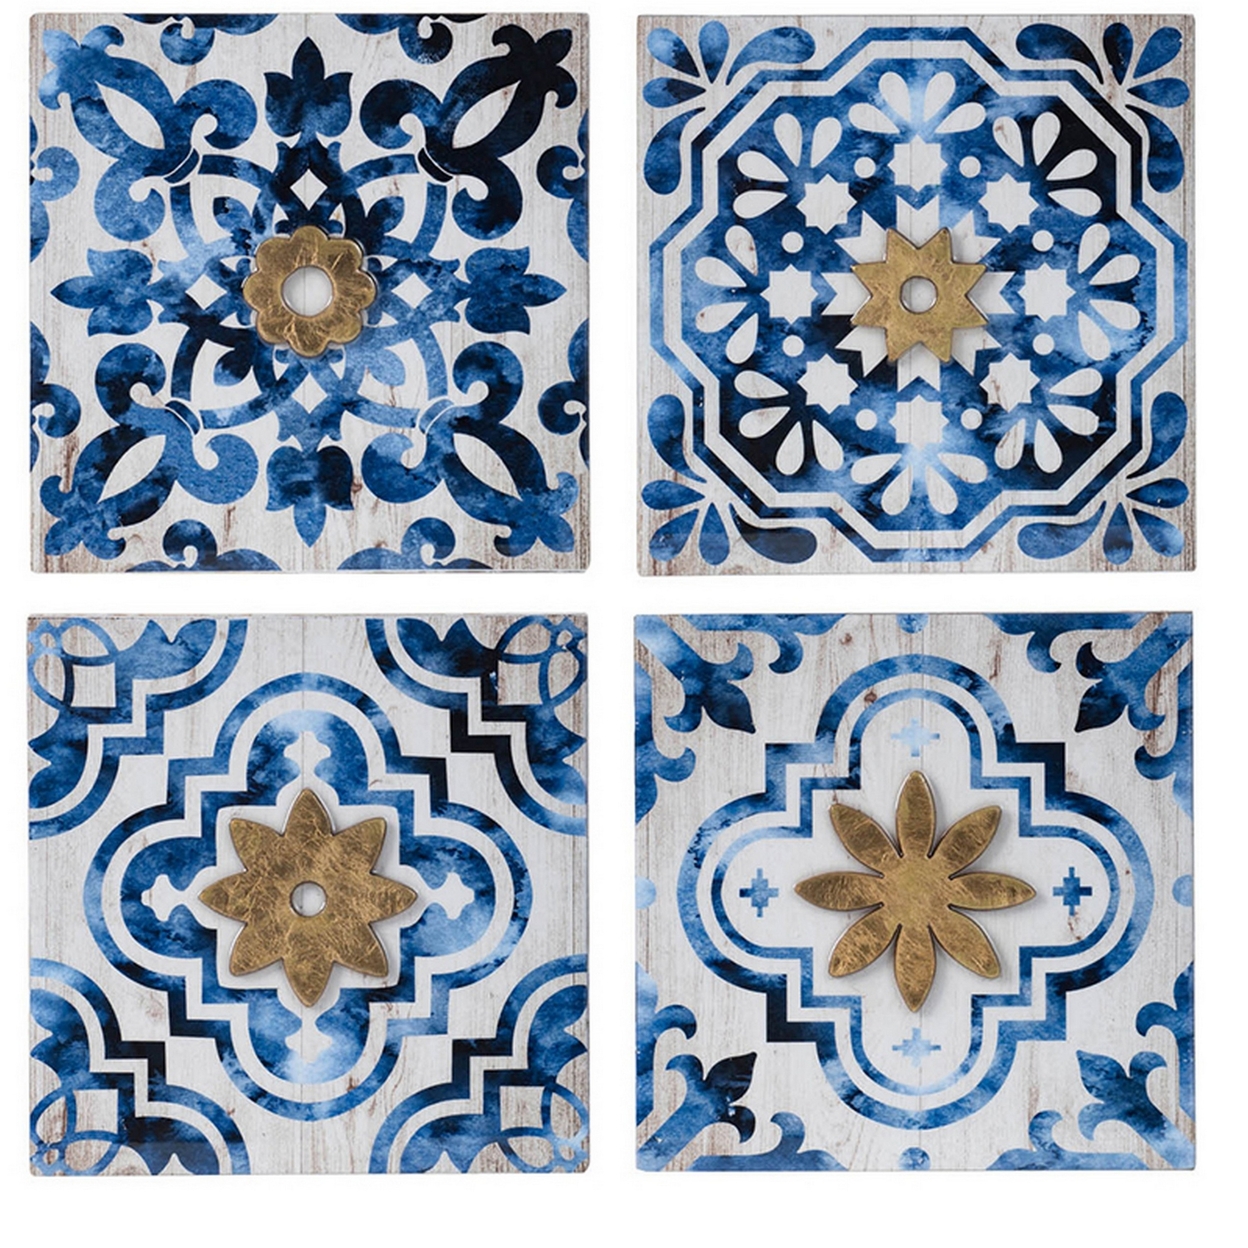 Set Of 4 Classic Framed Wall Decor, Abstract Tile Design, White And Blue- Saltoro Sherpi